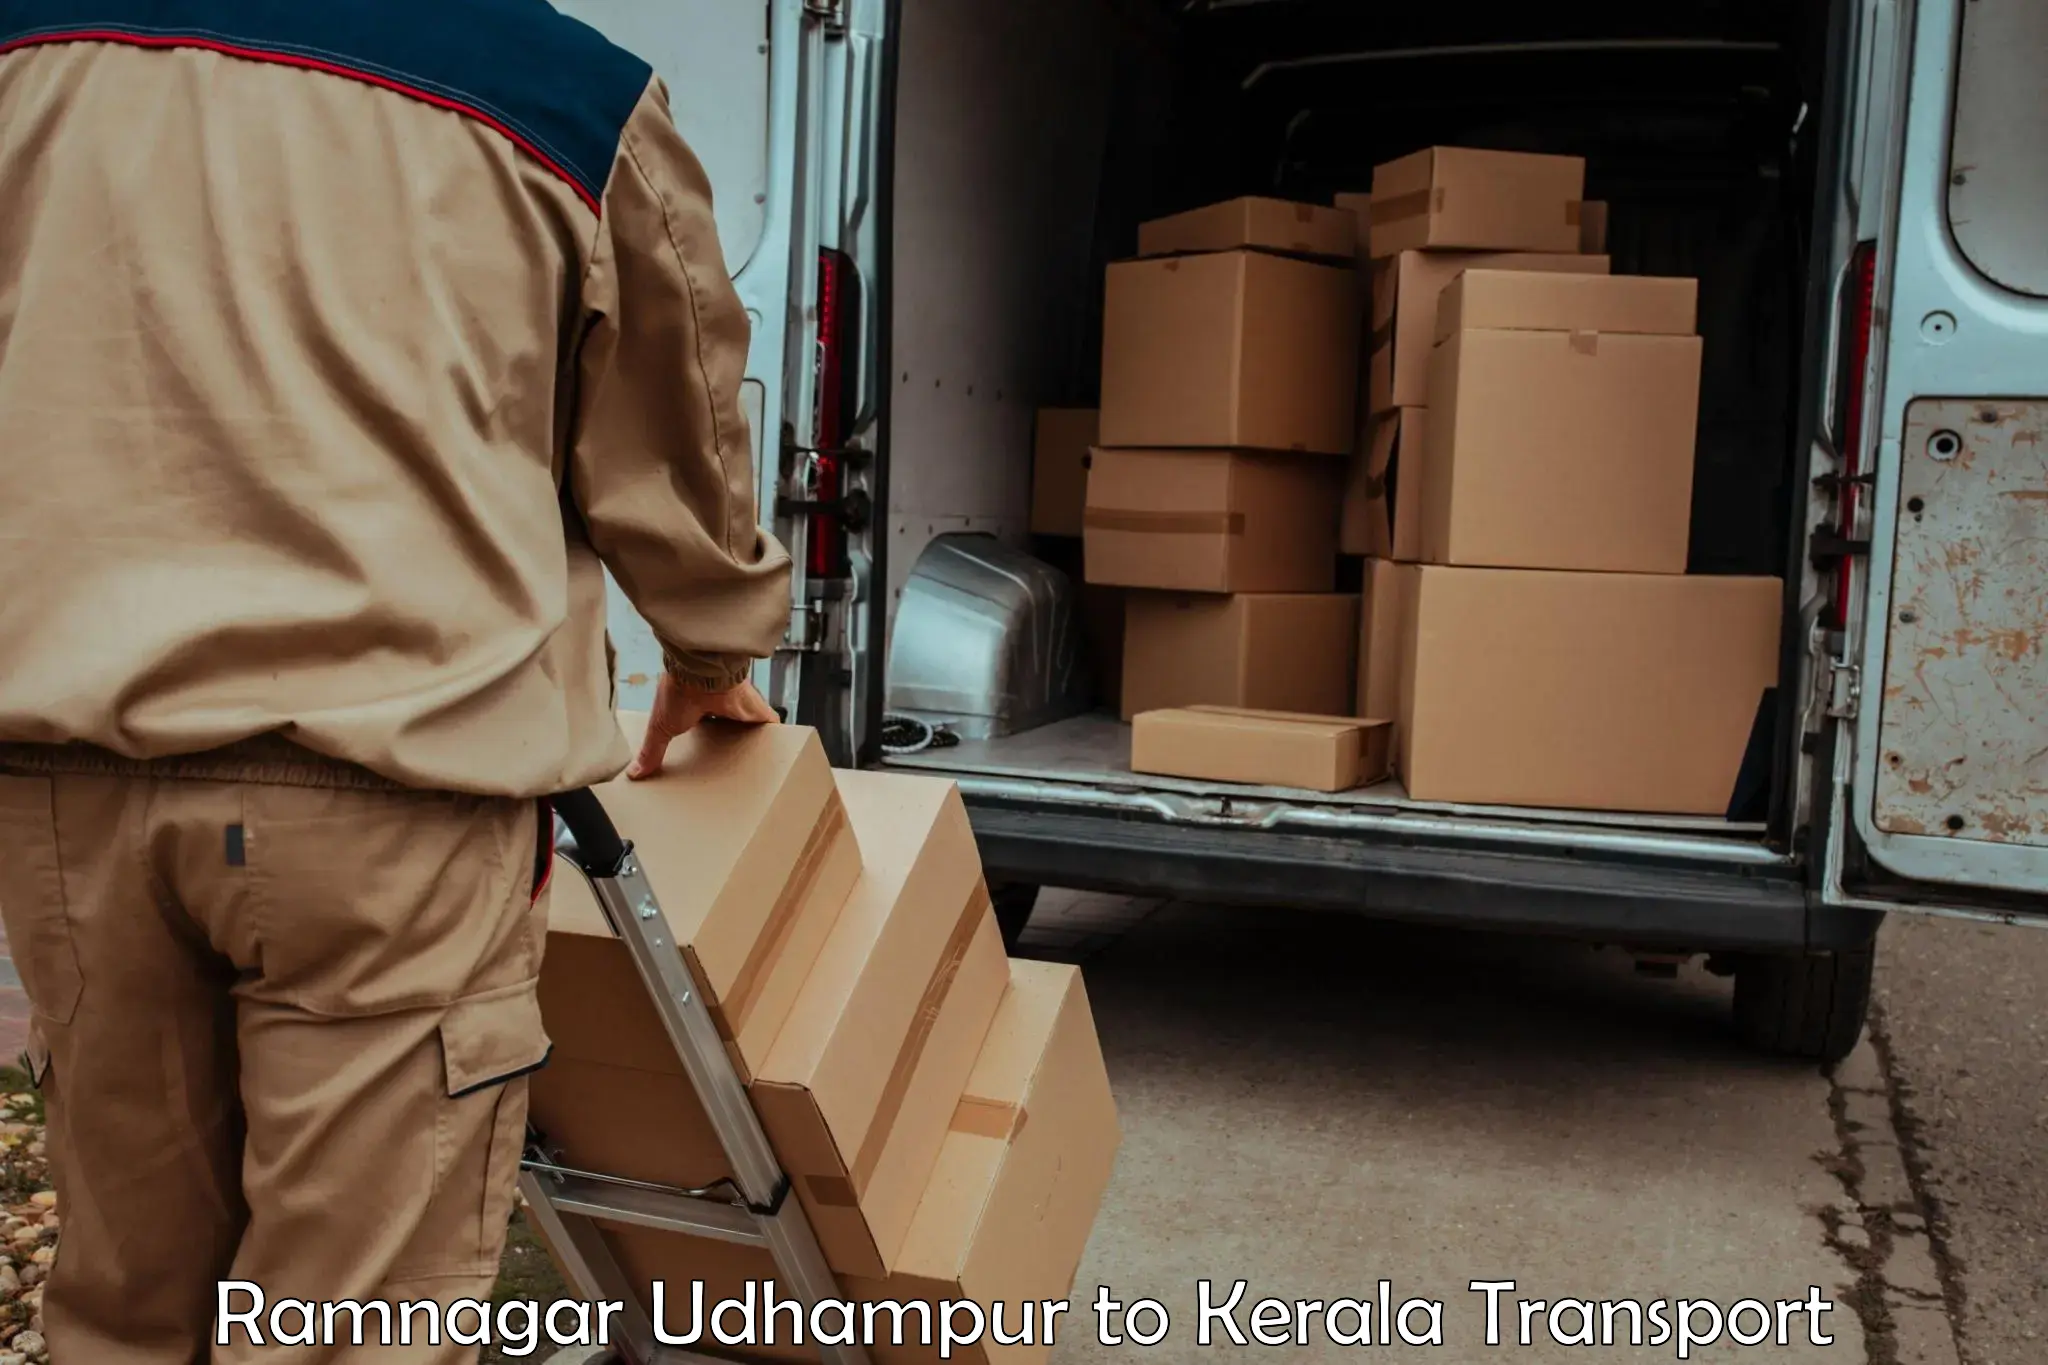 Goods delivery service Ramnagar Udhampur to Kollam